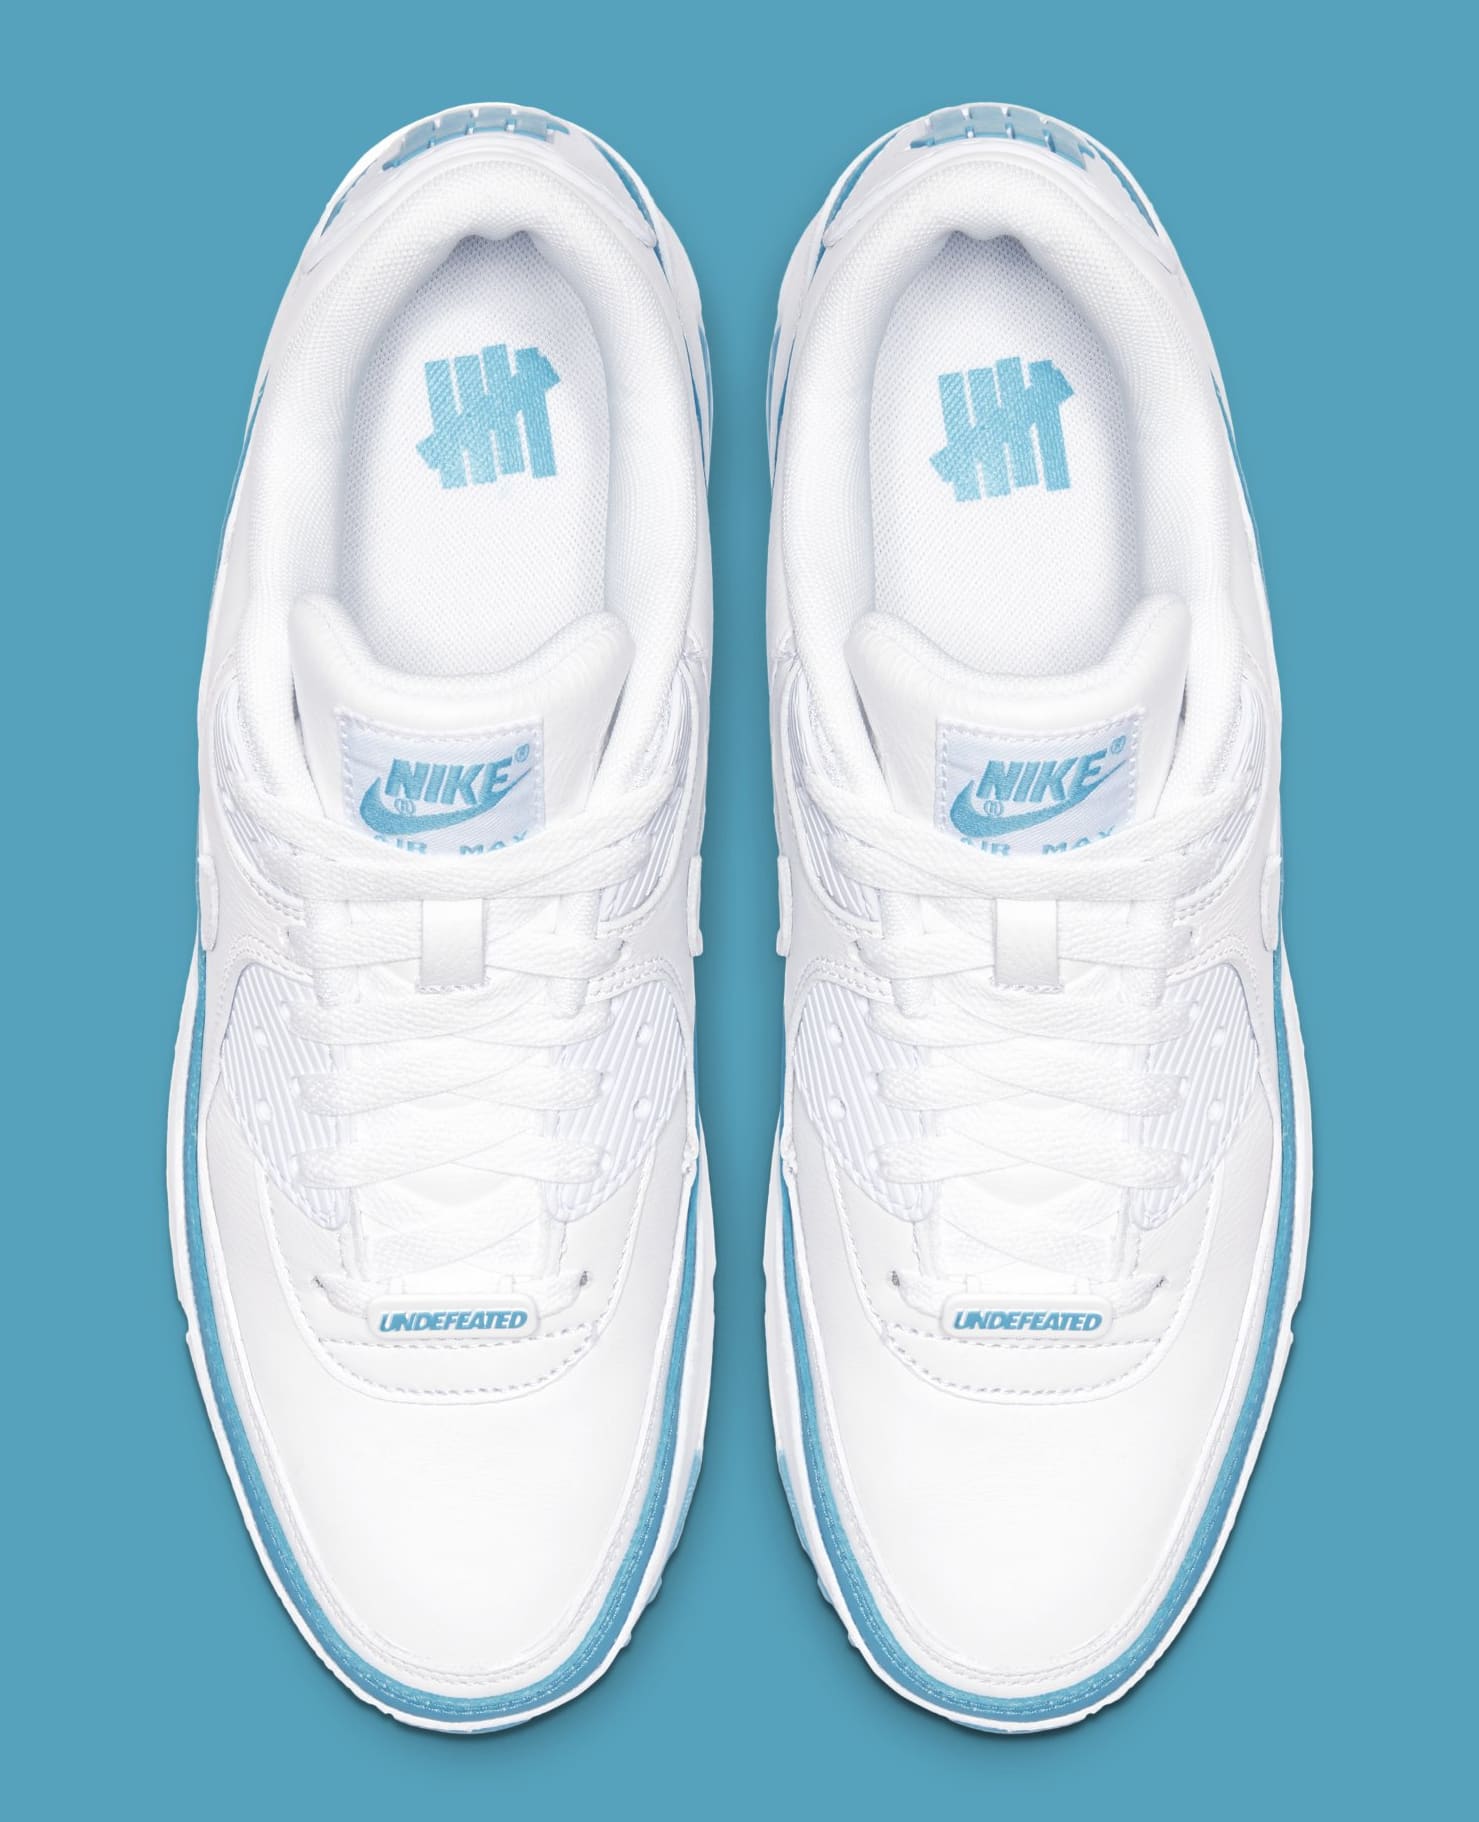 undefeated x nike air max 90 white blue fury